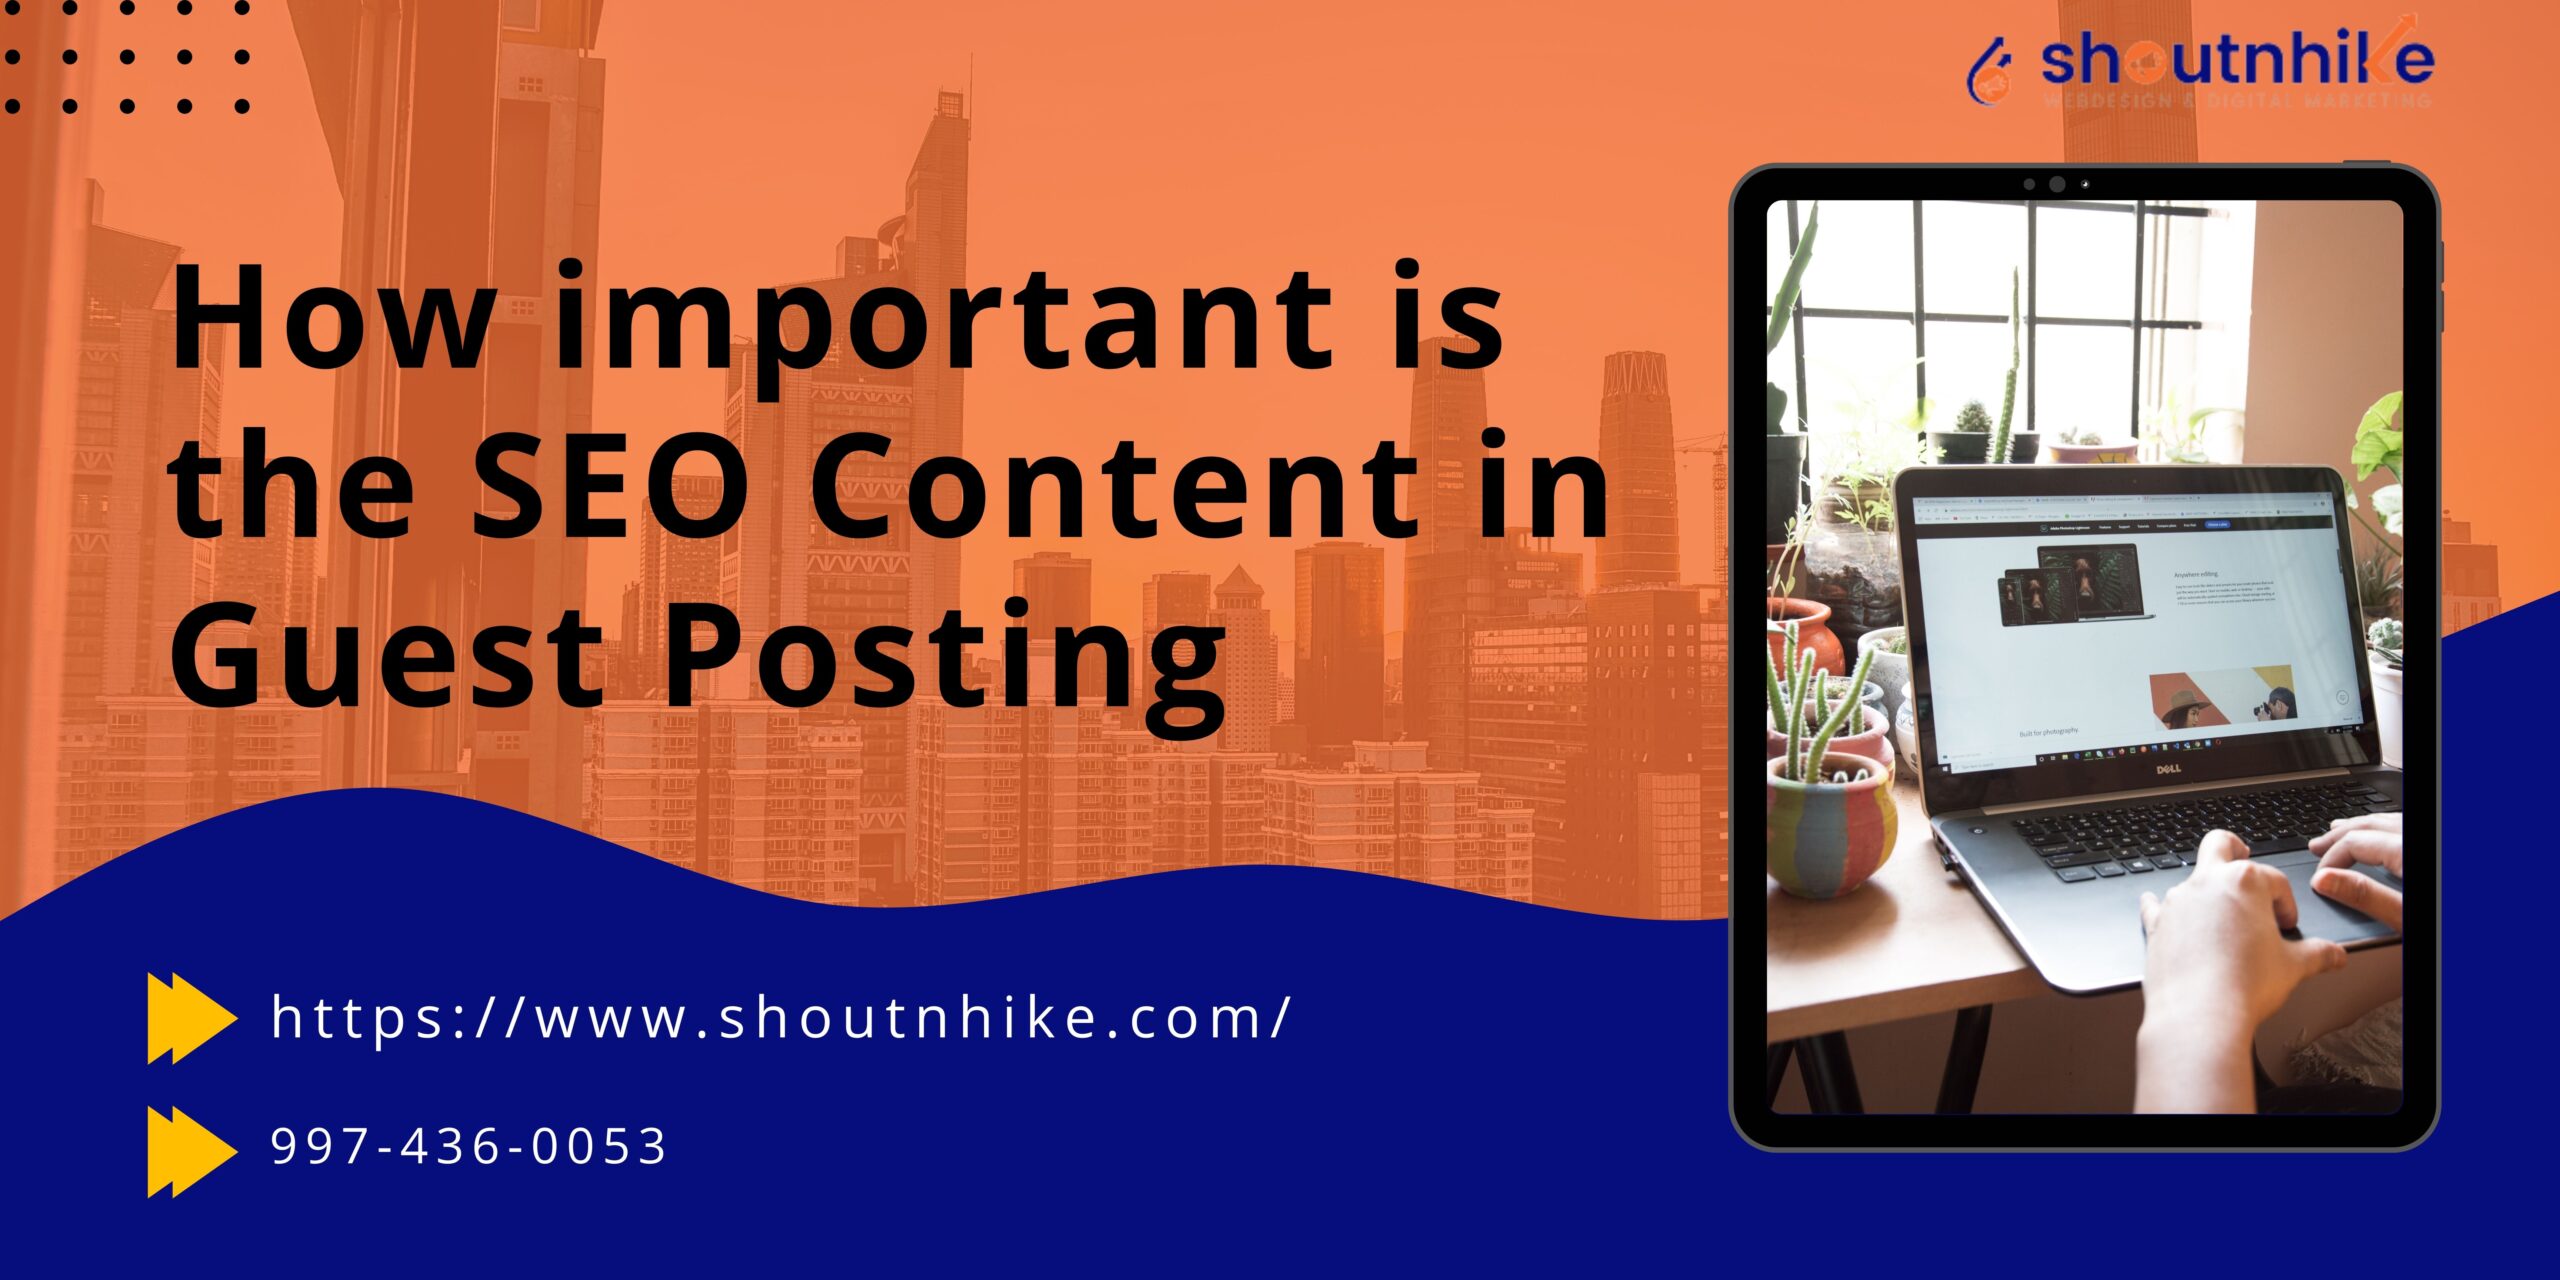 How important is the SEO Content in Guest Posting